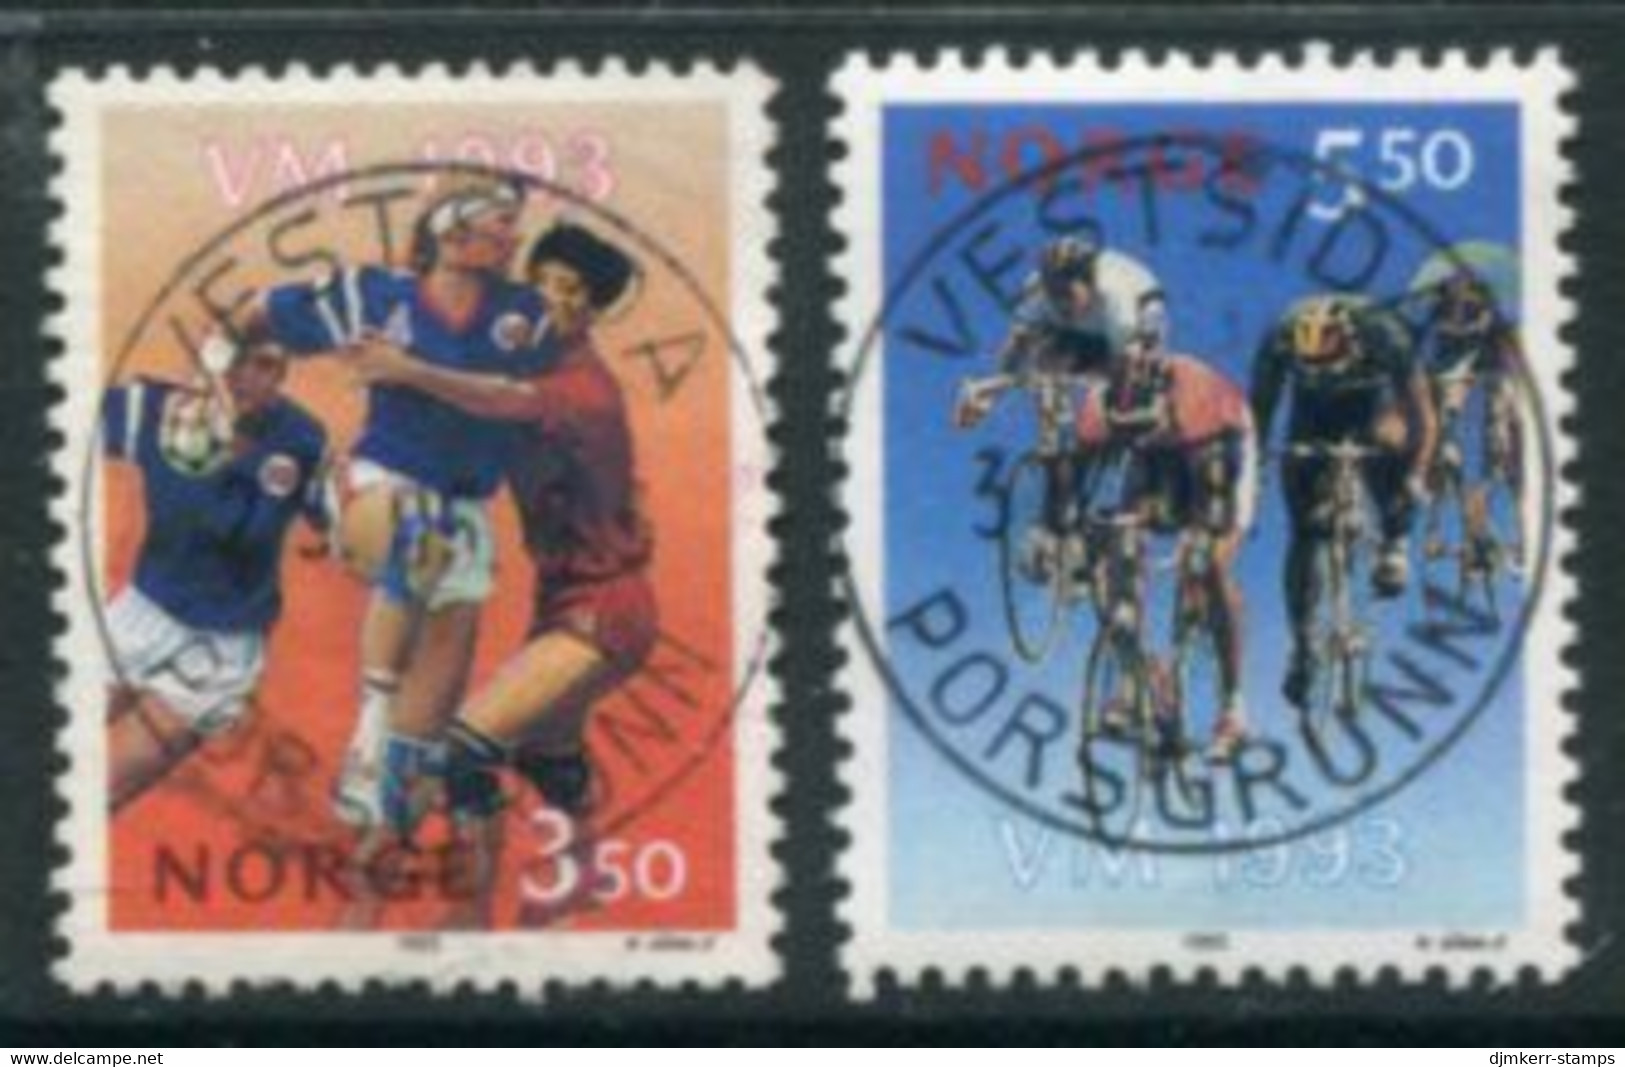 NORWAY 1993 Sports Championships Used   Michel 1129-30 - Usados